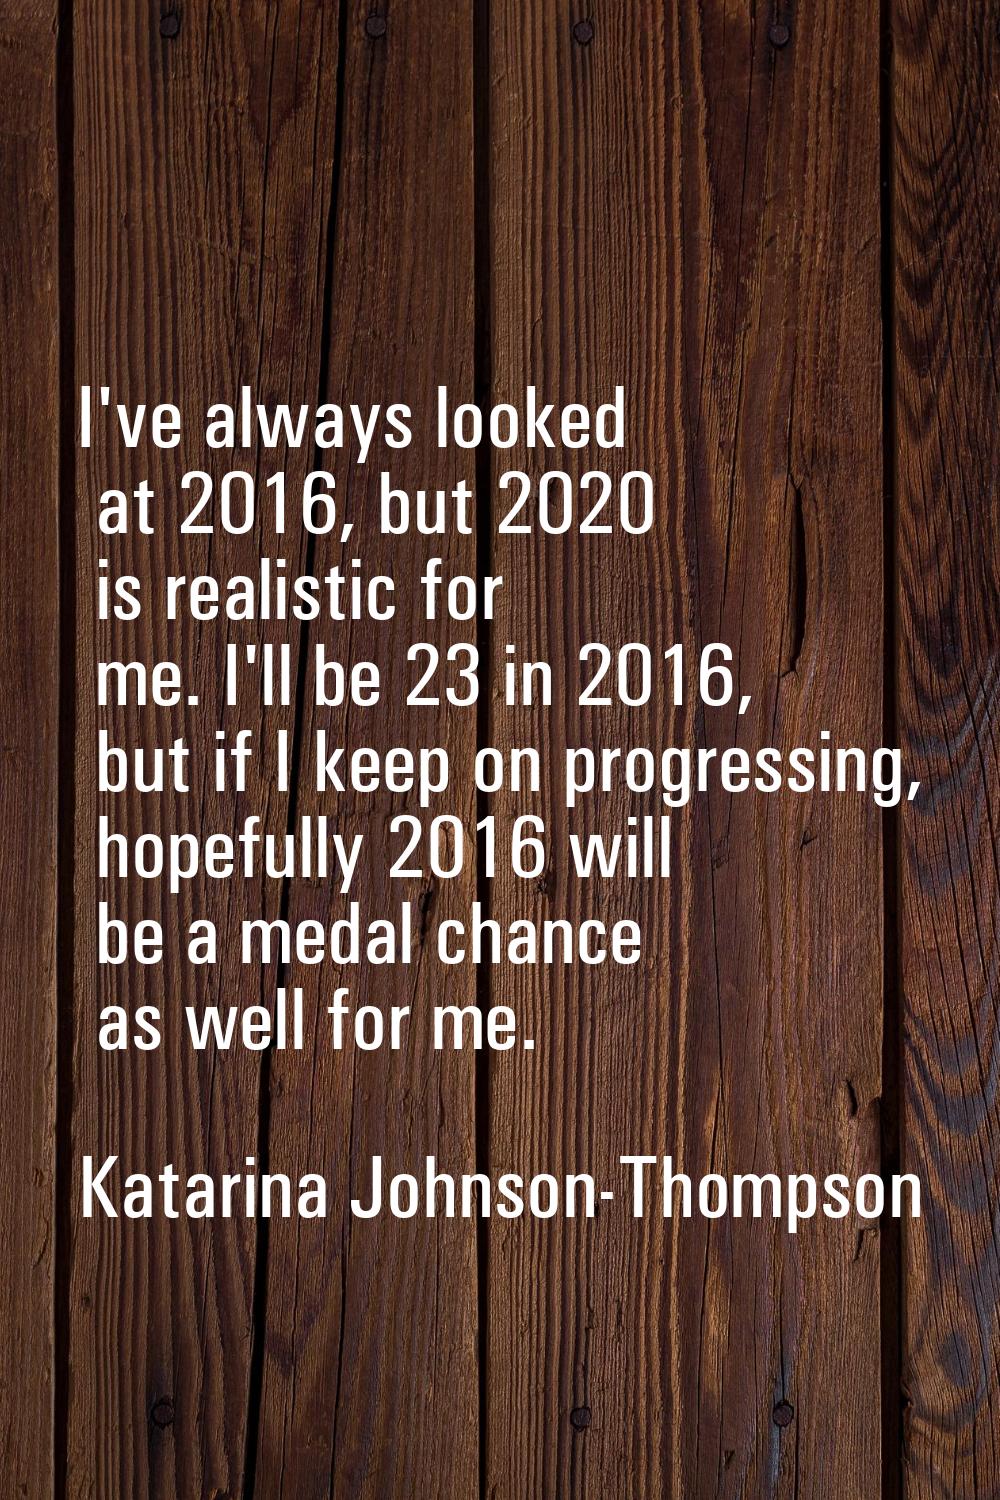 I've always looked at 2016, but 2020 is realistic for me. I'll be 23 in 2016, but if I keep on prog